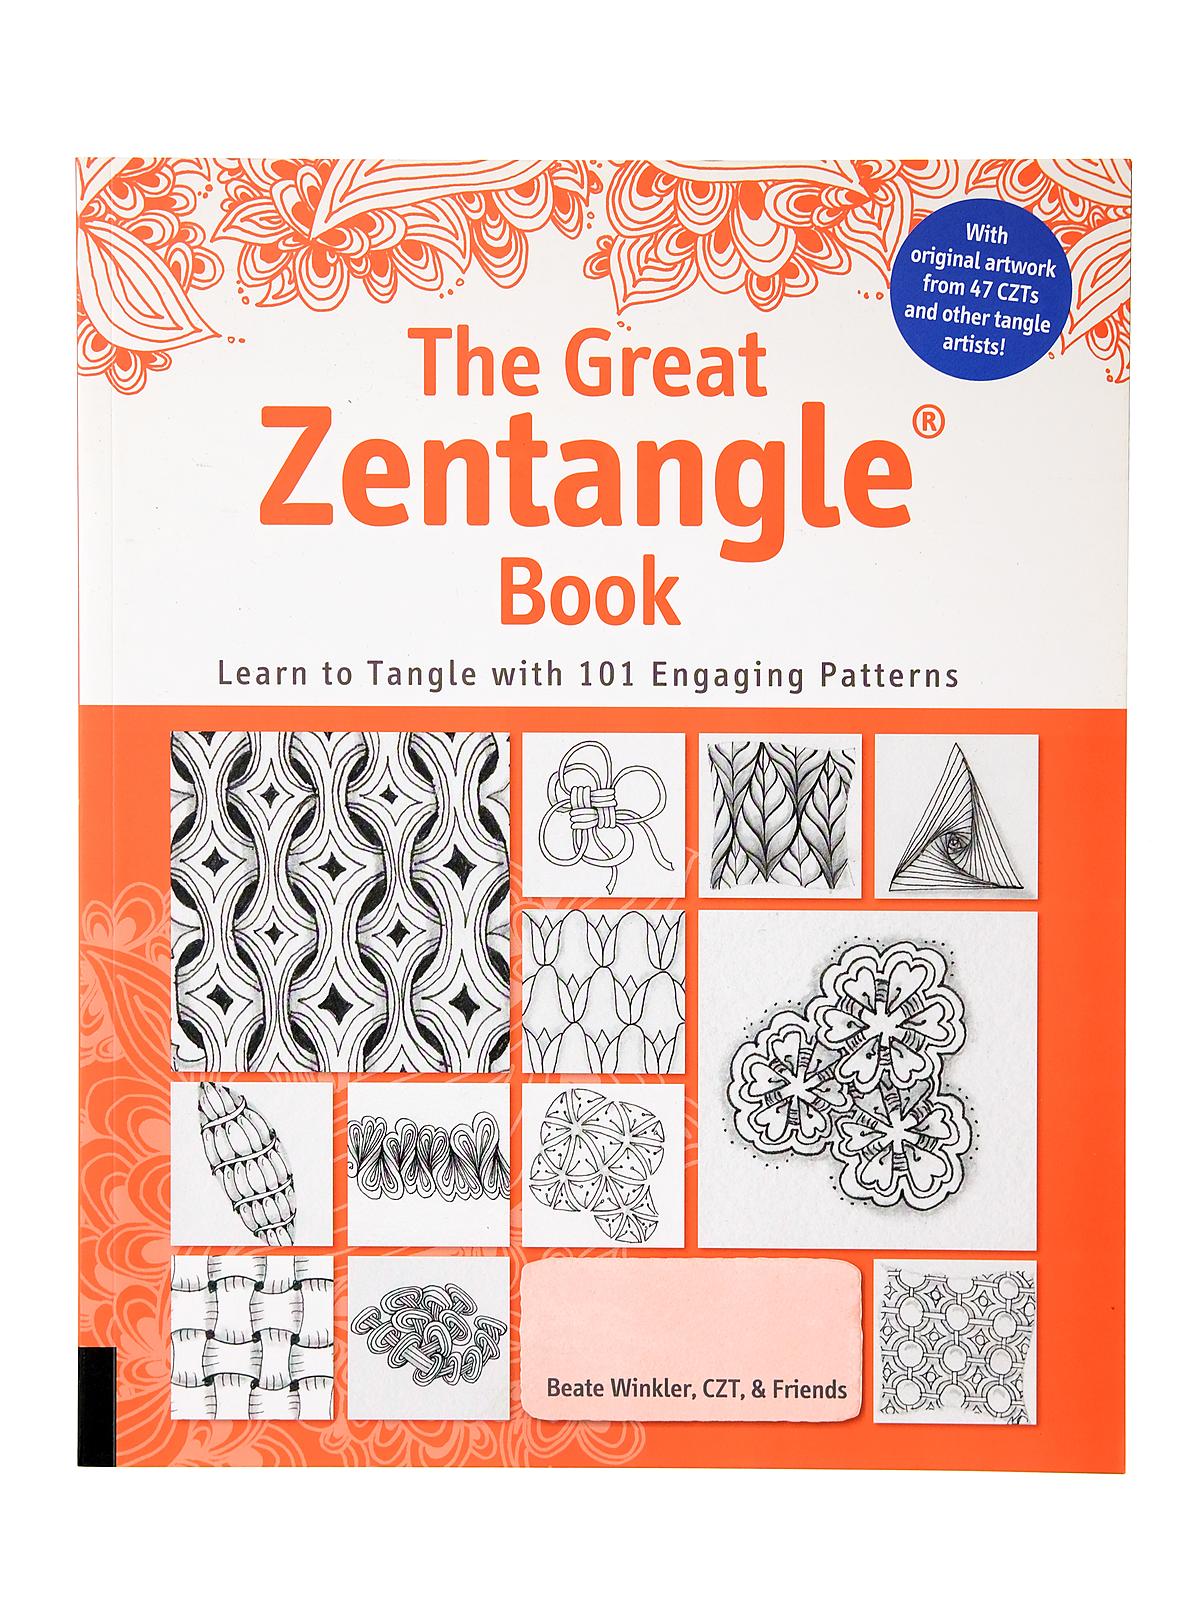 The Great Zentangle Book Each